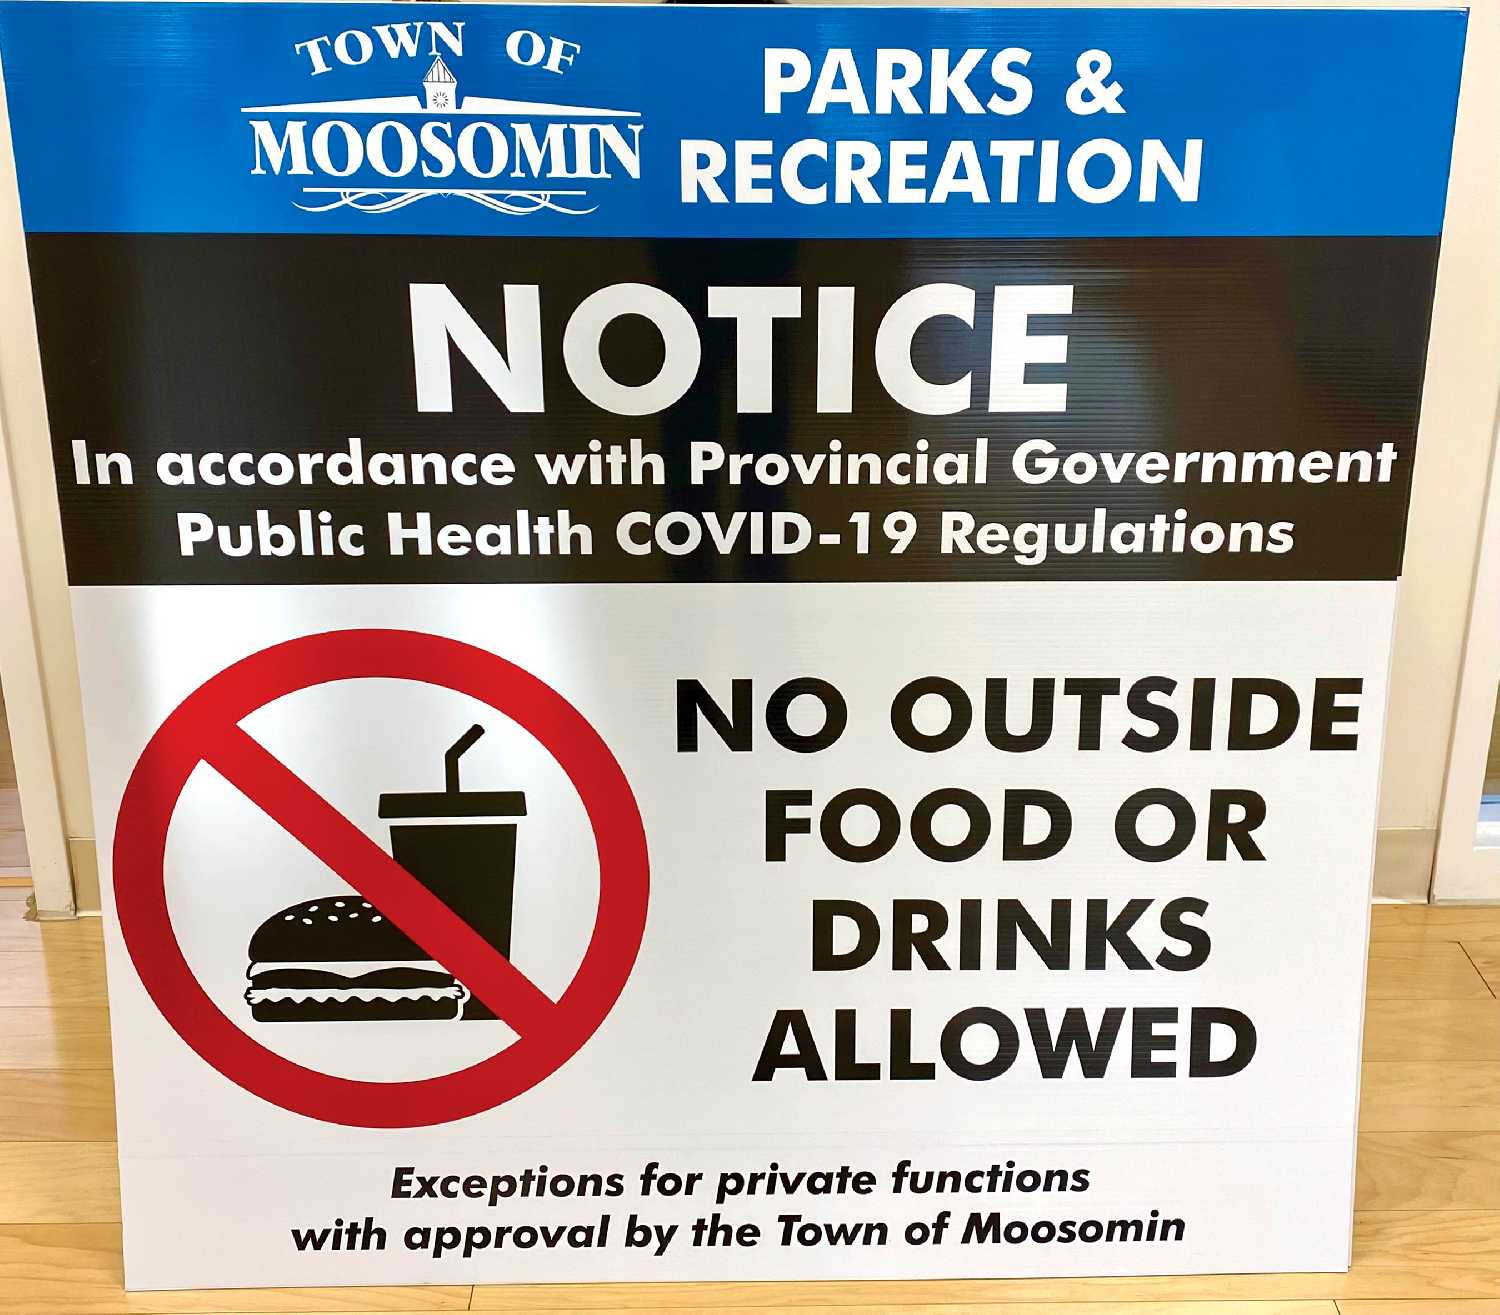 This sign will be going in at some of the town facilities regarding new Covid regulations.